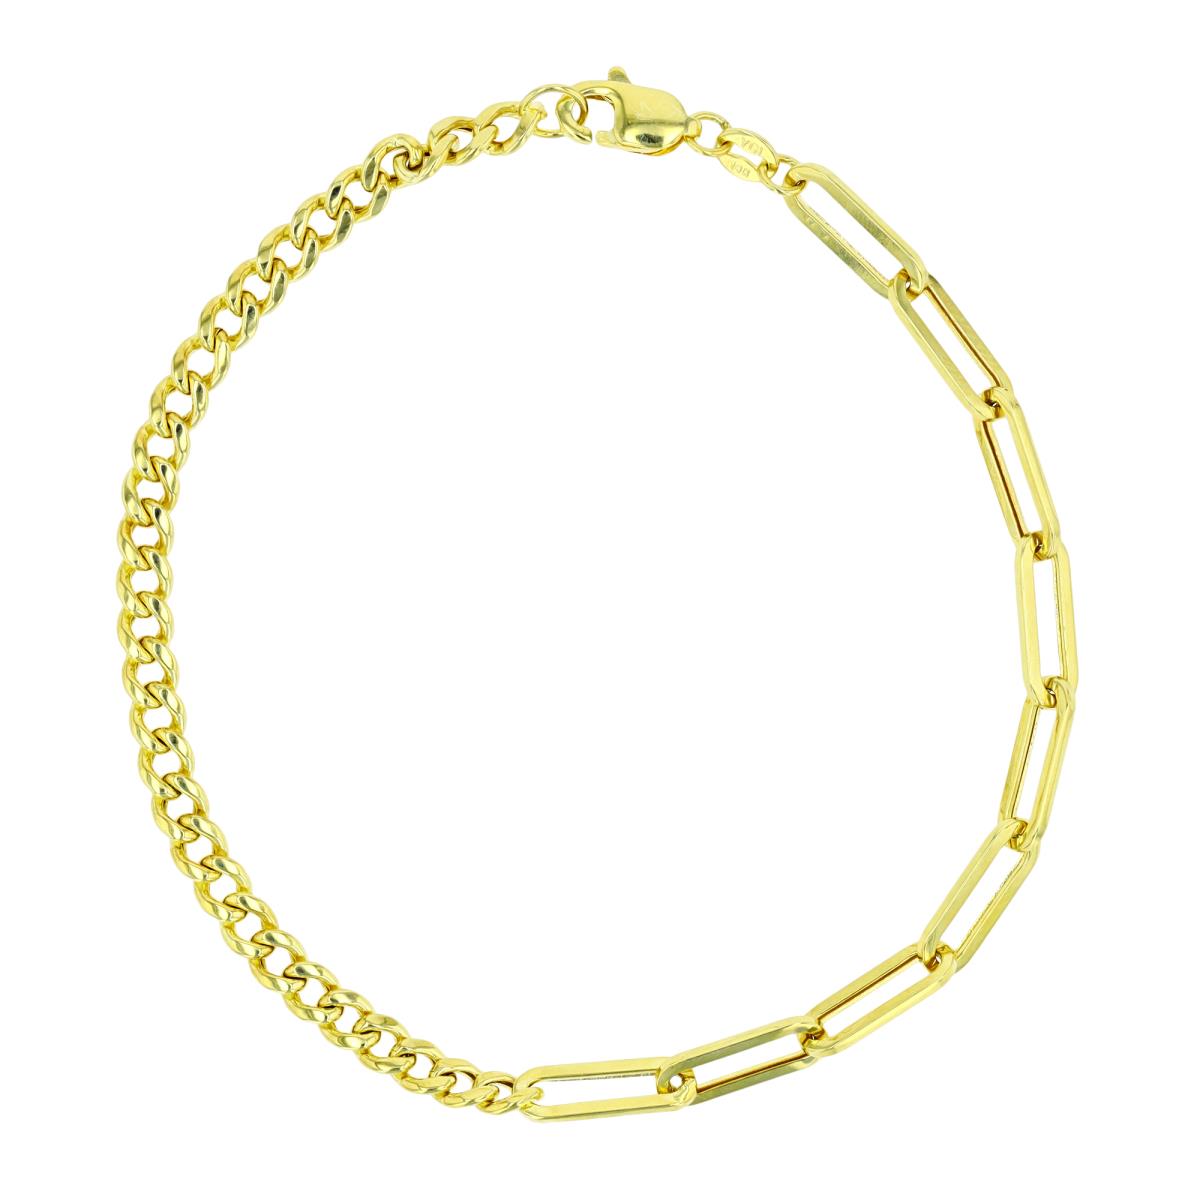 10K Yellow Gold Cuban and Paperclip 7.5" Chain Bracelet